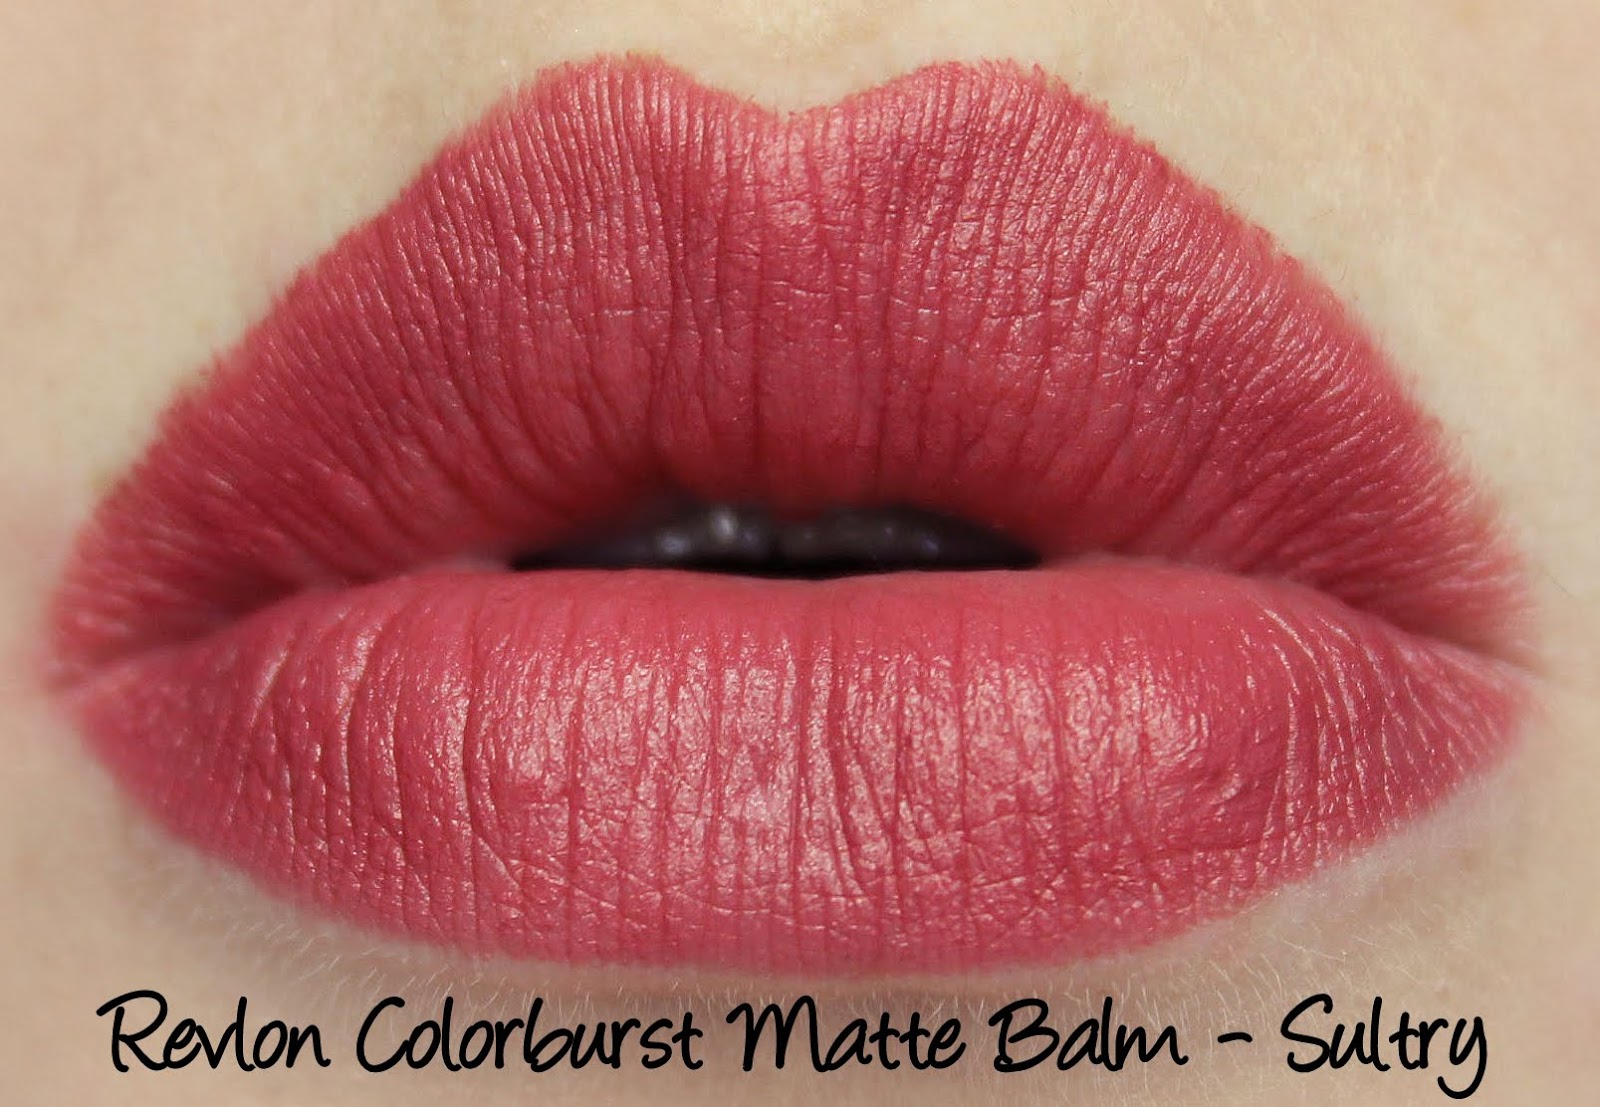 Revlon Colorburst Matte Balm - Sultry Swatches & Review